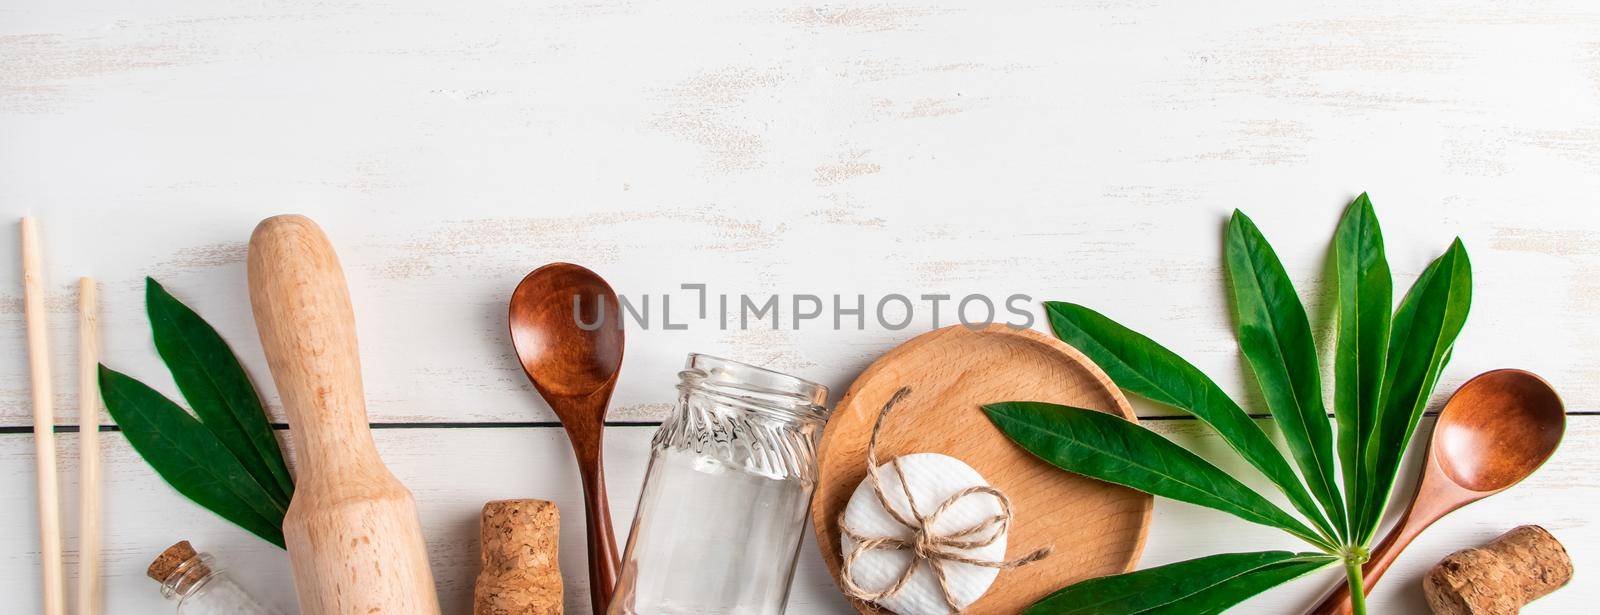 Eco-friendly recyclable products on white wooden background. Plastic-free kitchen accessories. Banner format